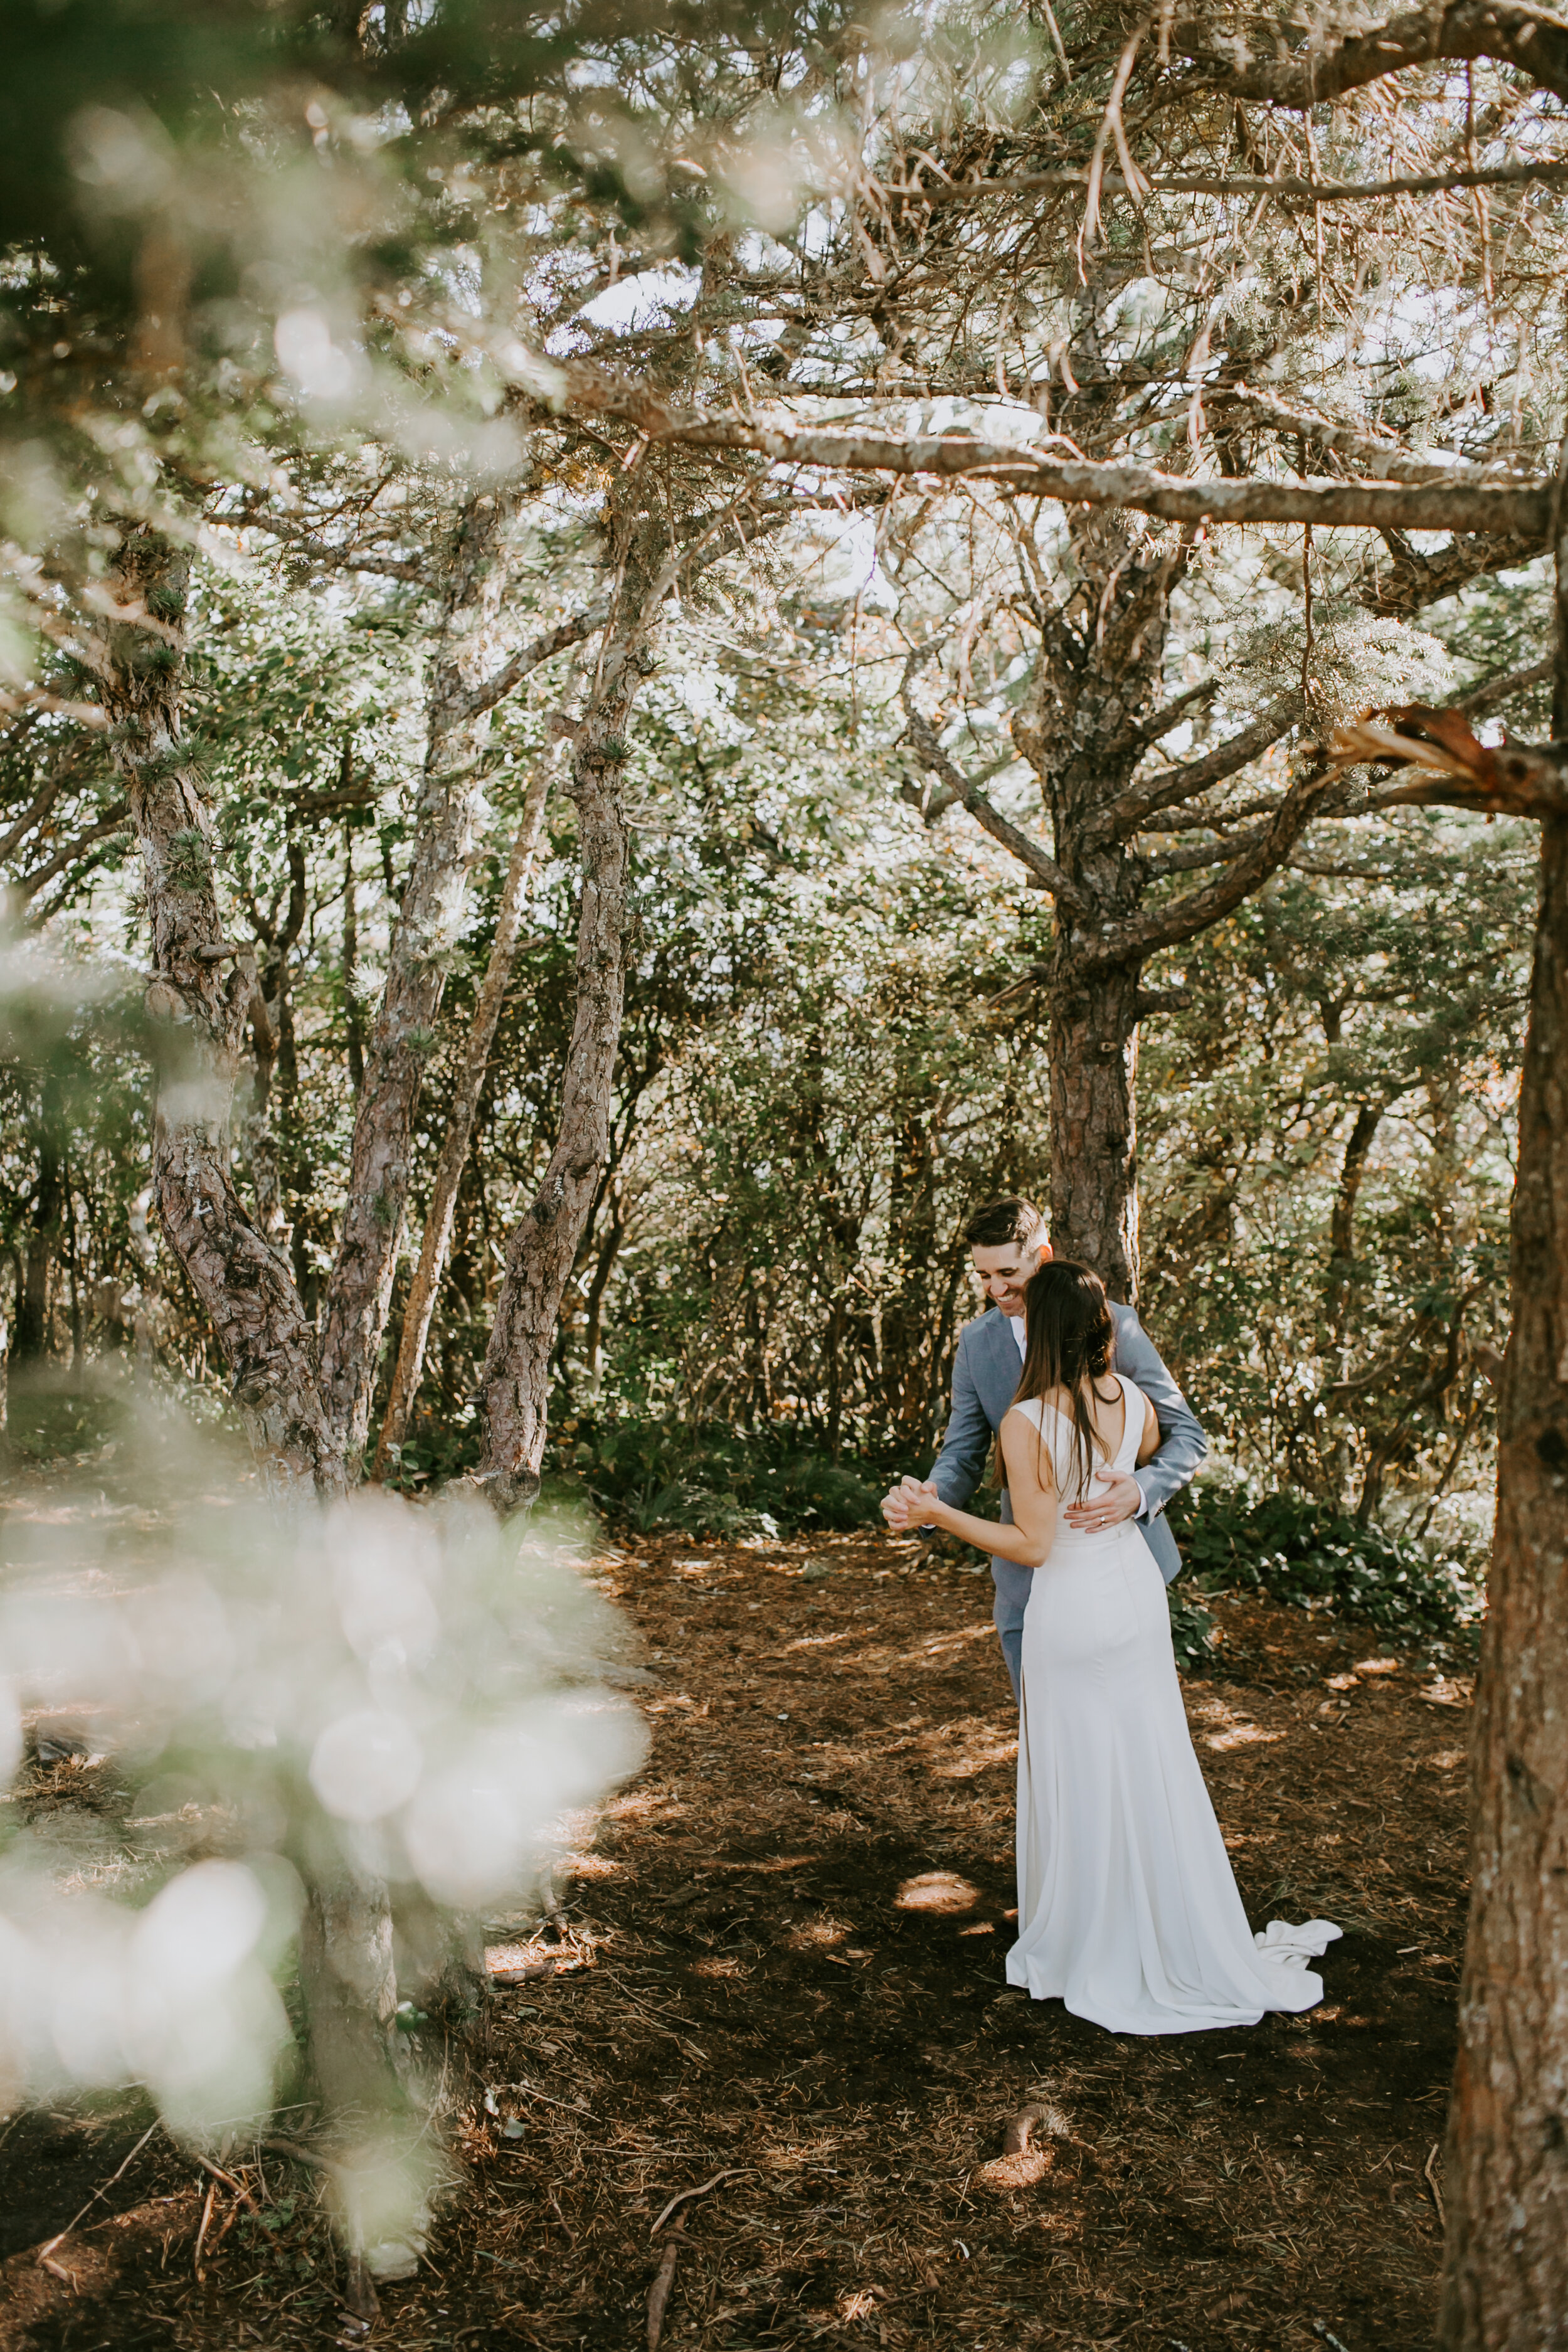 A bride and groom dancing in the woods.